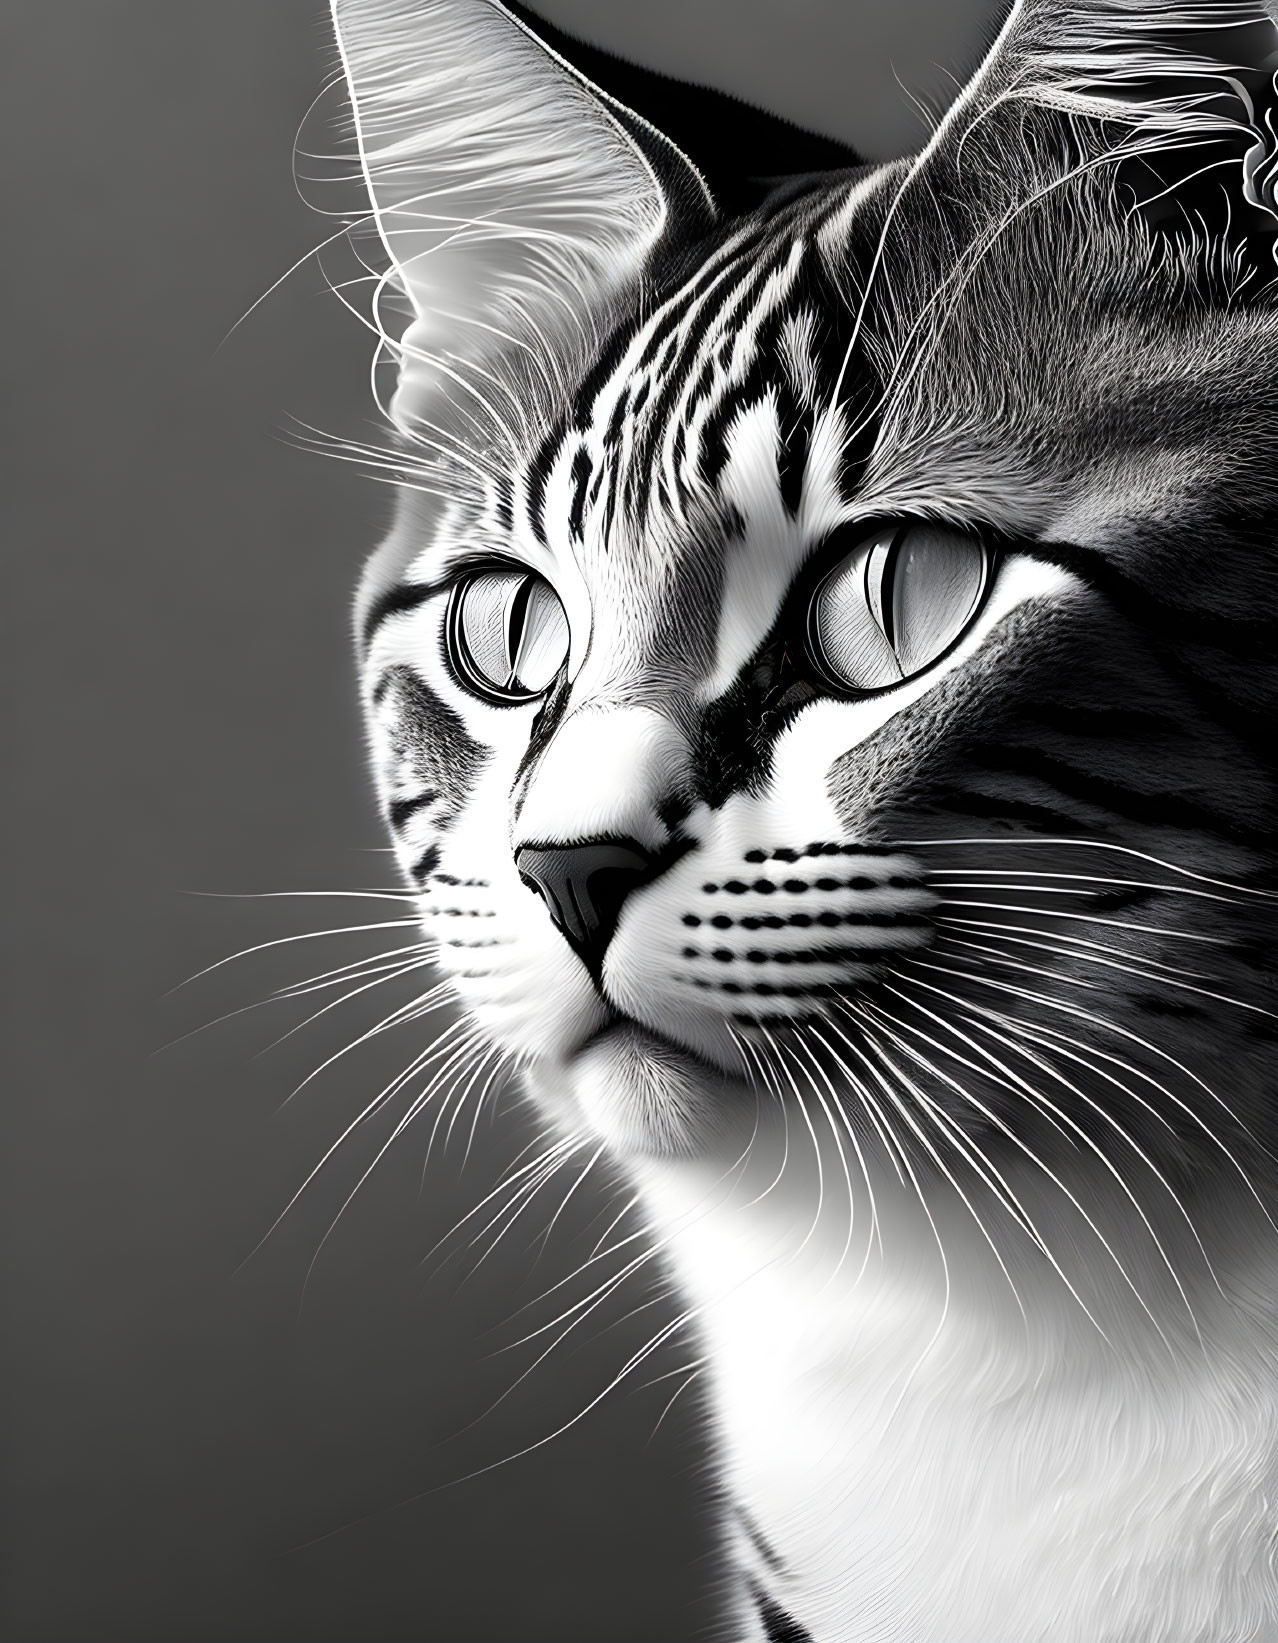 Domestic cat with striking markings and intense eyes